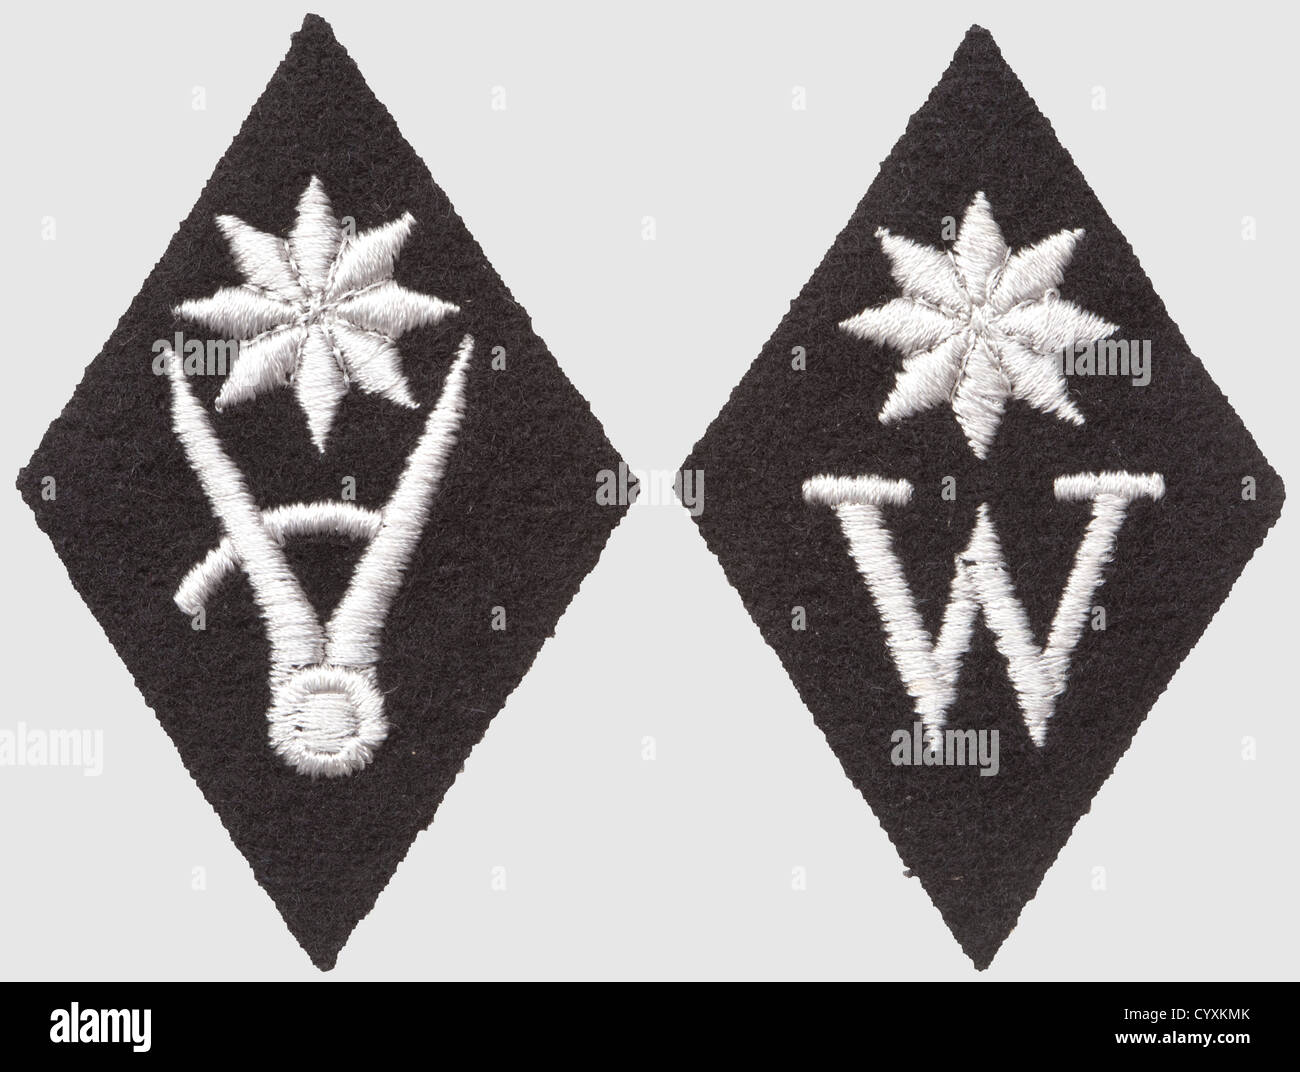 Two sleeve lozenges for personnel,in the SS-office for economy and administration,for the sections economy and construction industry. RZM-machine-embroidered version on black ground,historic,historical,1930s,1930s,20th century,secret service,security service,secret services,security services,police,armed service,armed services,NS,National Socialism,Nazism,Third Reich,German Reich,Germany,utensil,piece of equipment,utensils,object,objects,stills,clipping,clippings,cut out,cut-out,cut-outs,fascism,fascistic,National Socialist,Na,Additional-Rights-Clearences-Not Available Stock Photo